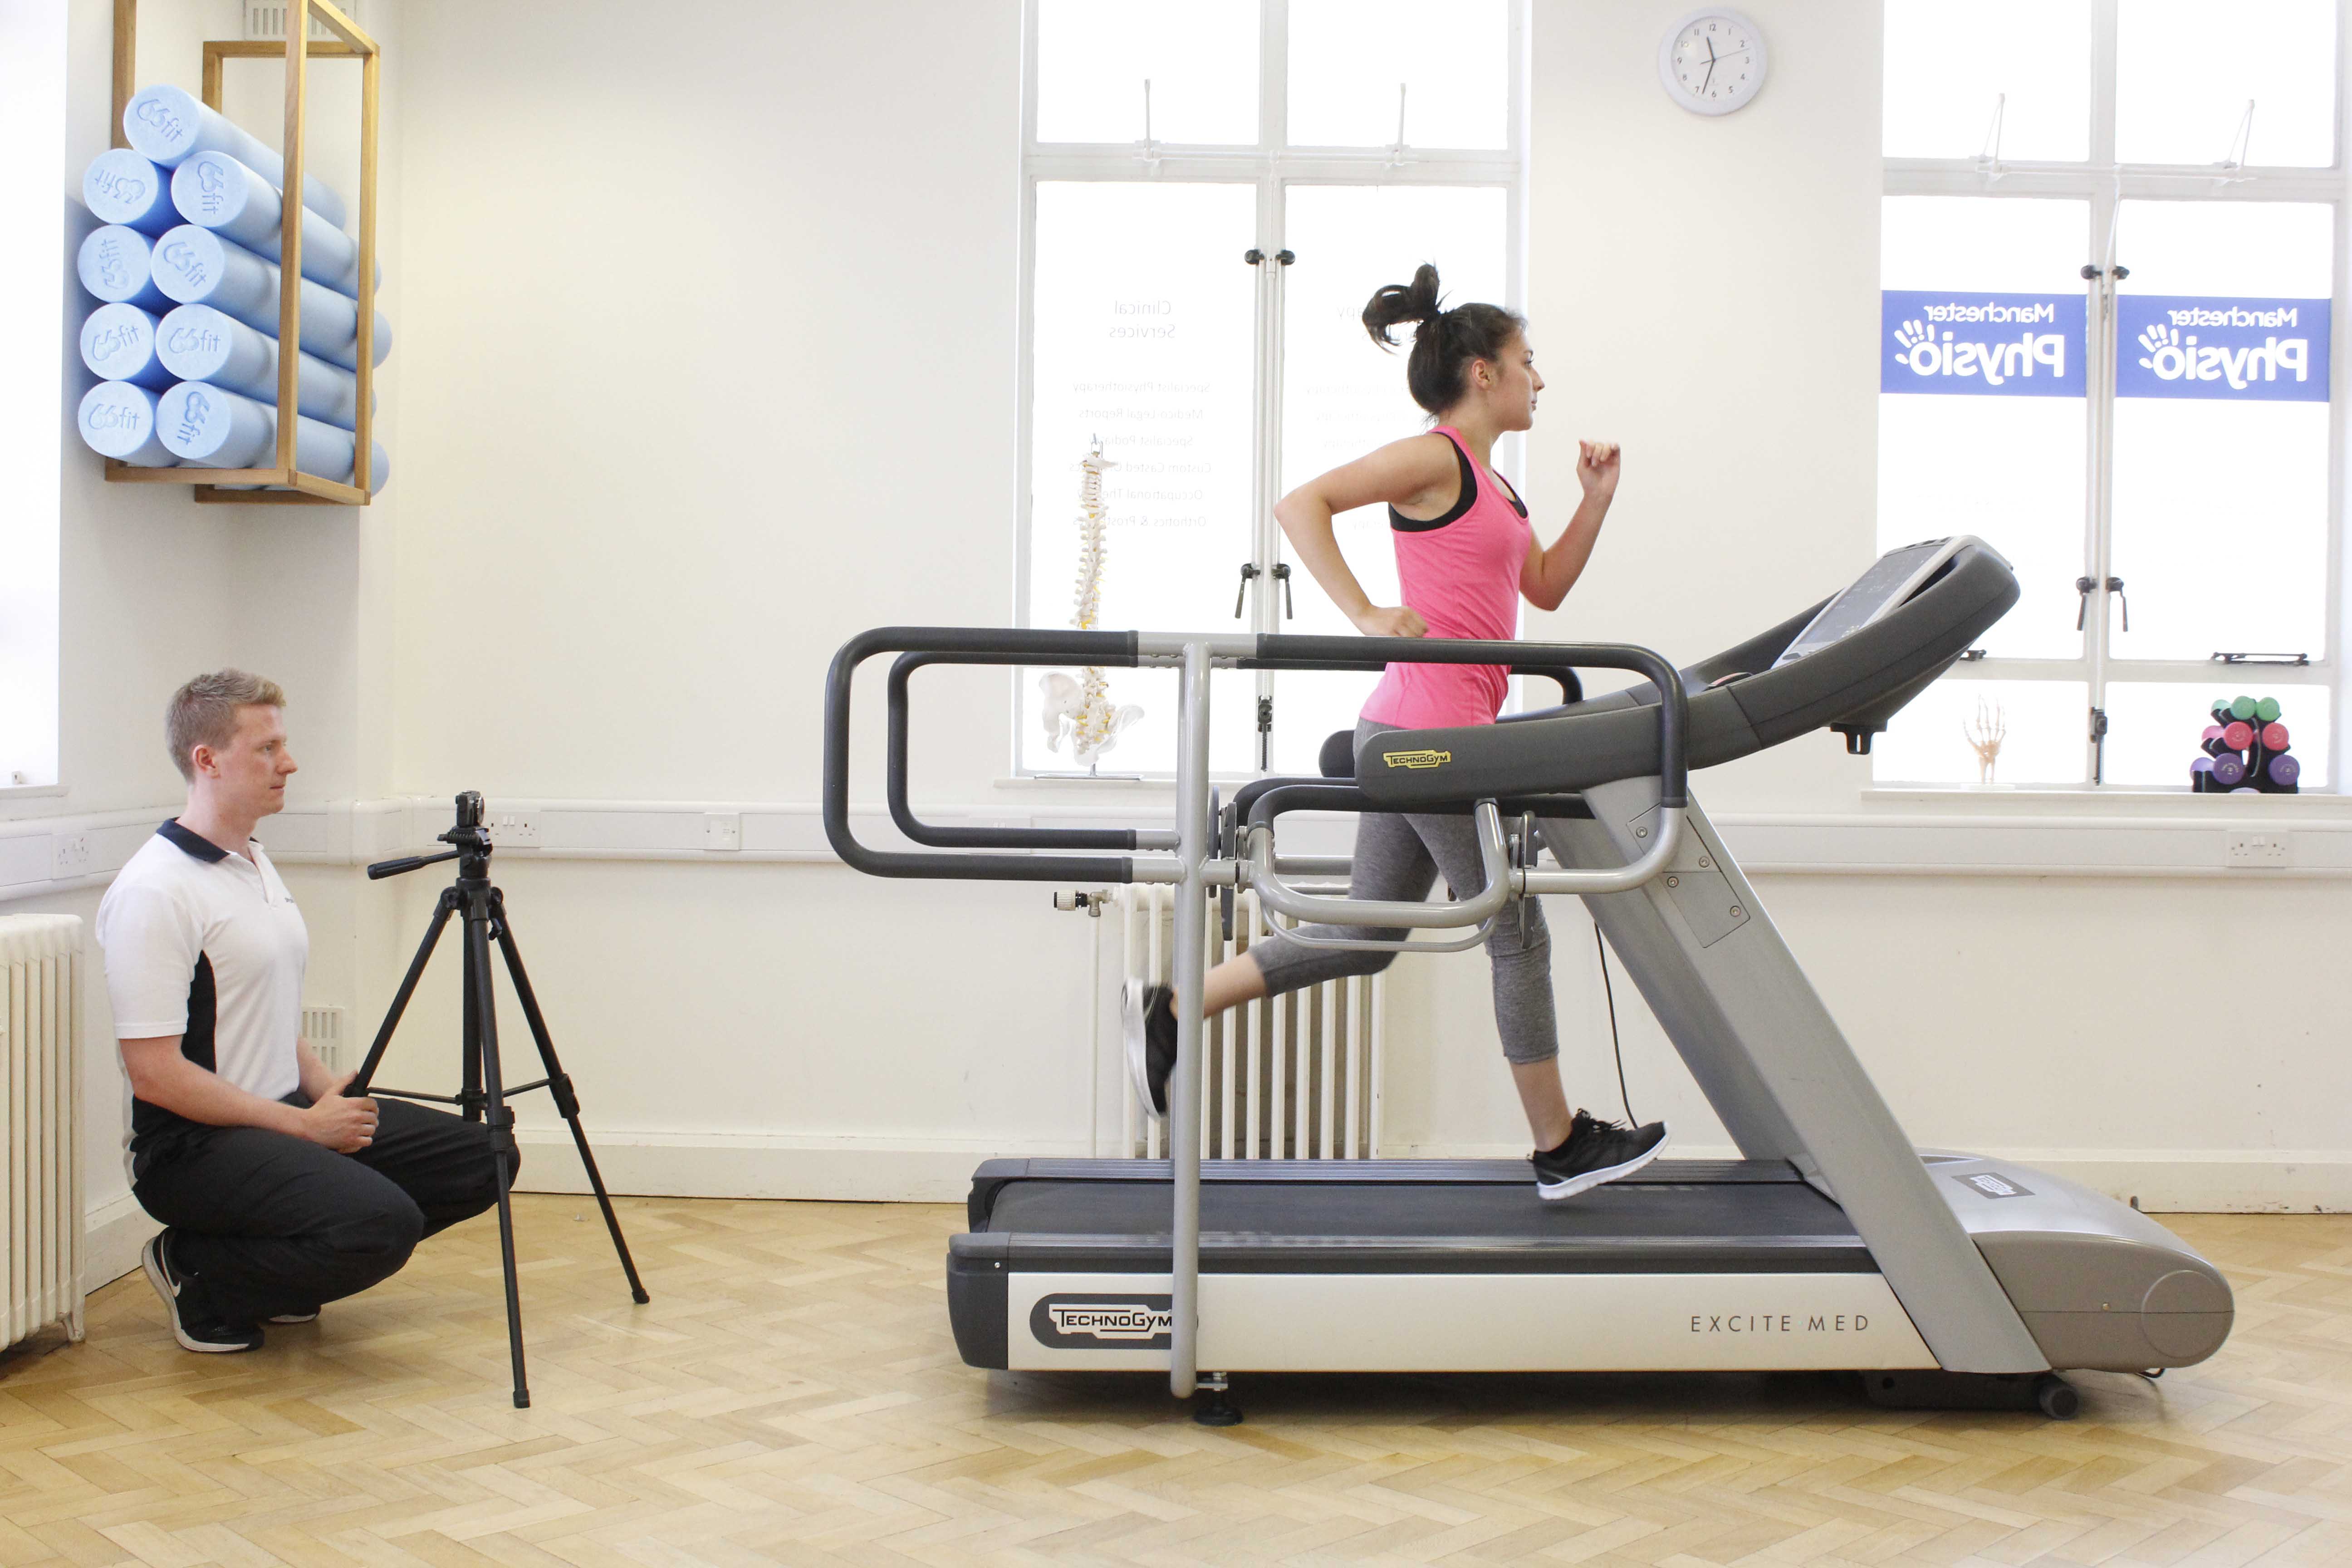 Biomenchanical Assessment using video analysis and a specialist treadmill